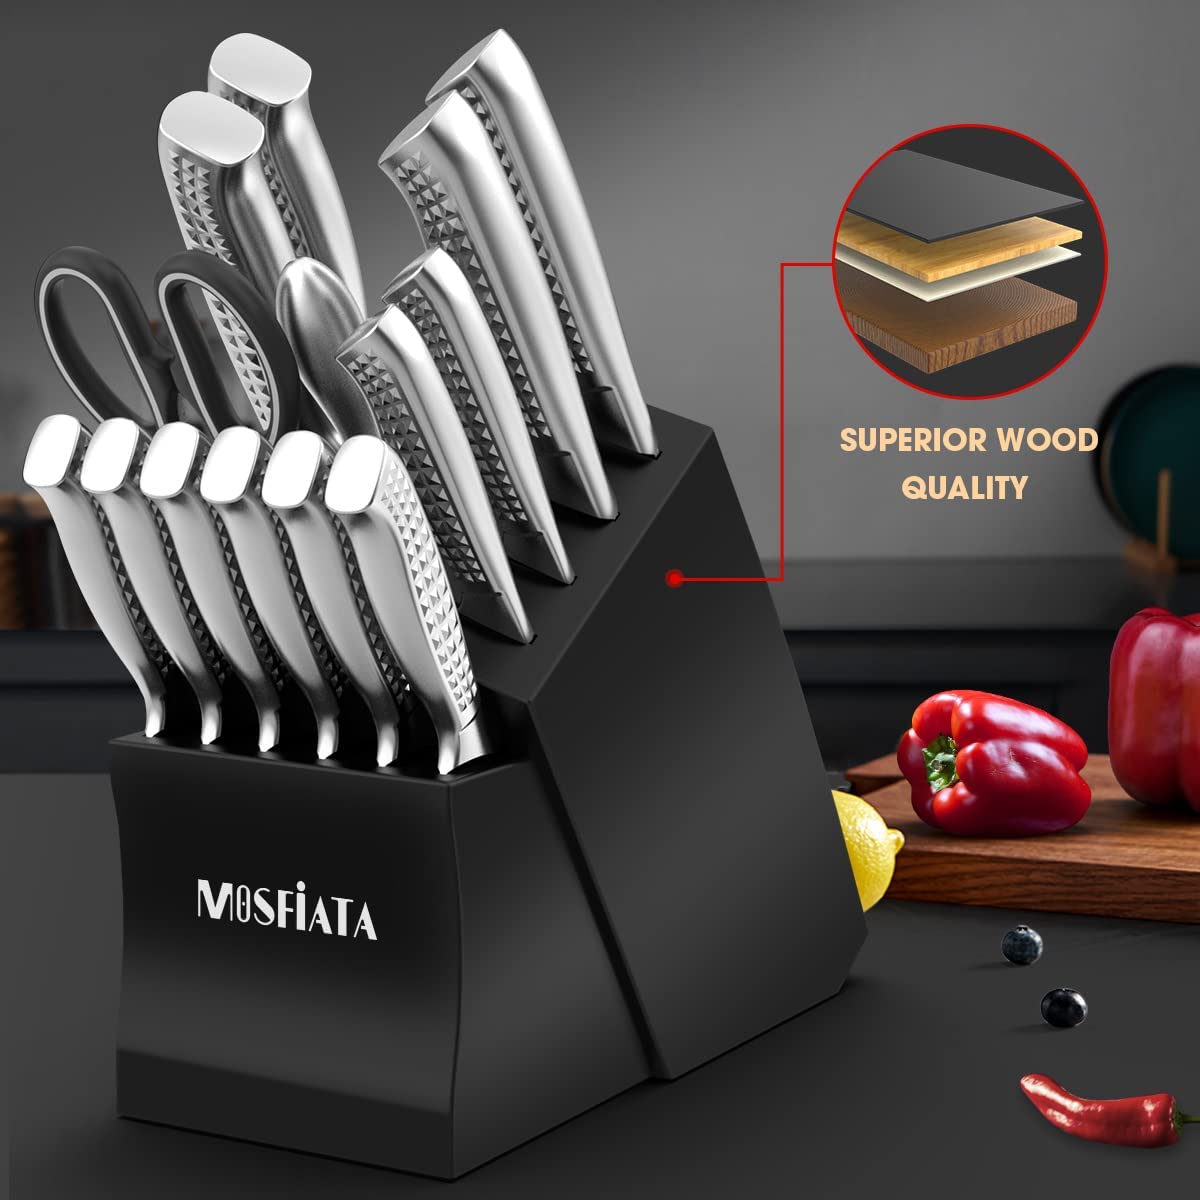 MOSFiATA Kitchen Knife Set-5Pcs, Professional Kitchen Chef's Knives with  Ultra Sharp Stainless Steel Blades, Bread Knife Cooking Knives Sets (silver)